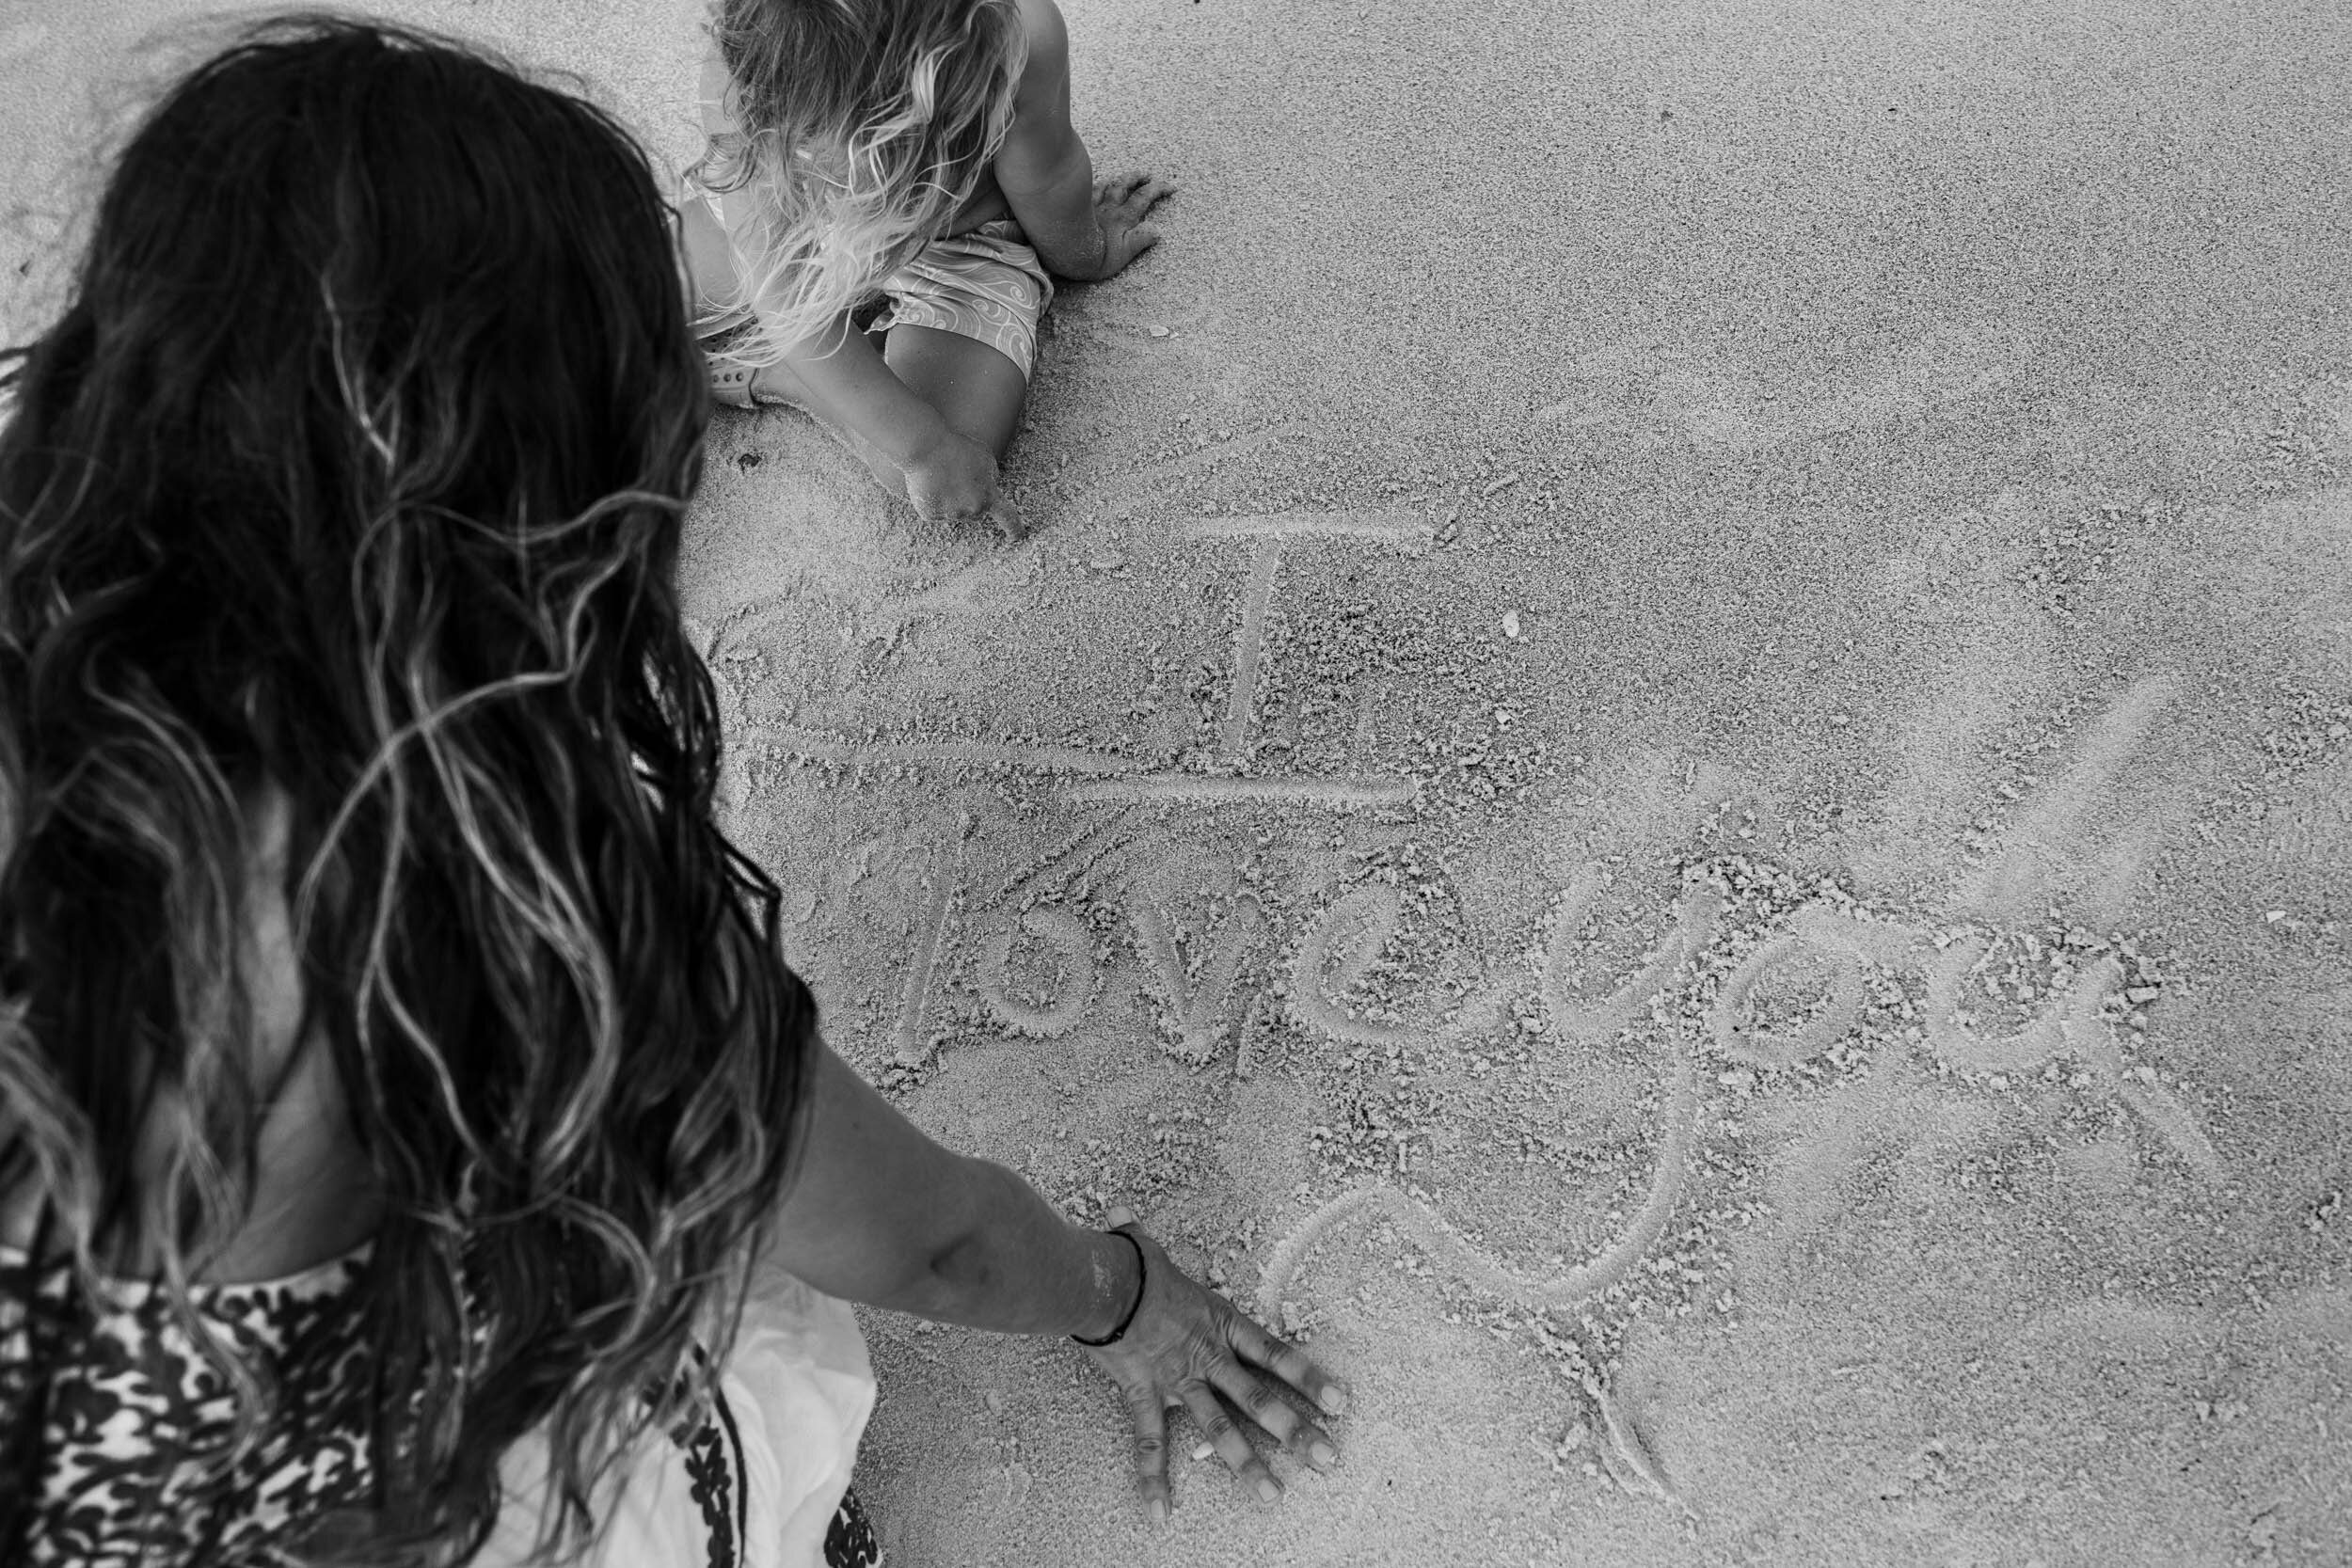 mom writing "I love you" in the sand at the beach